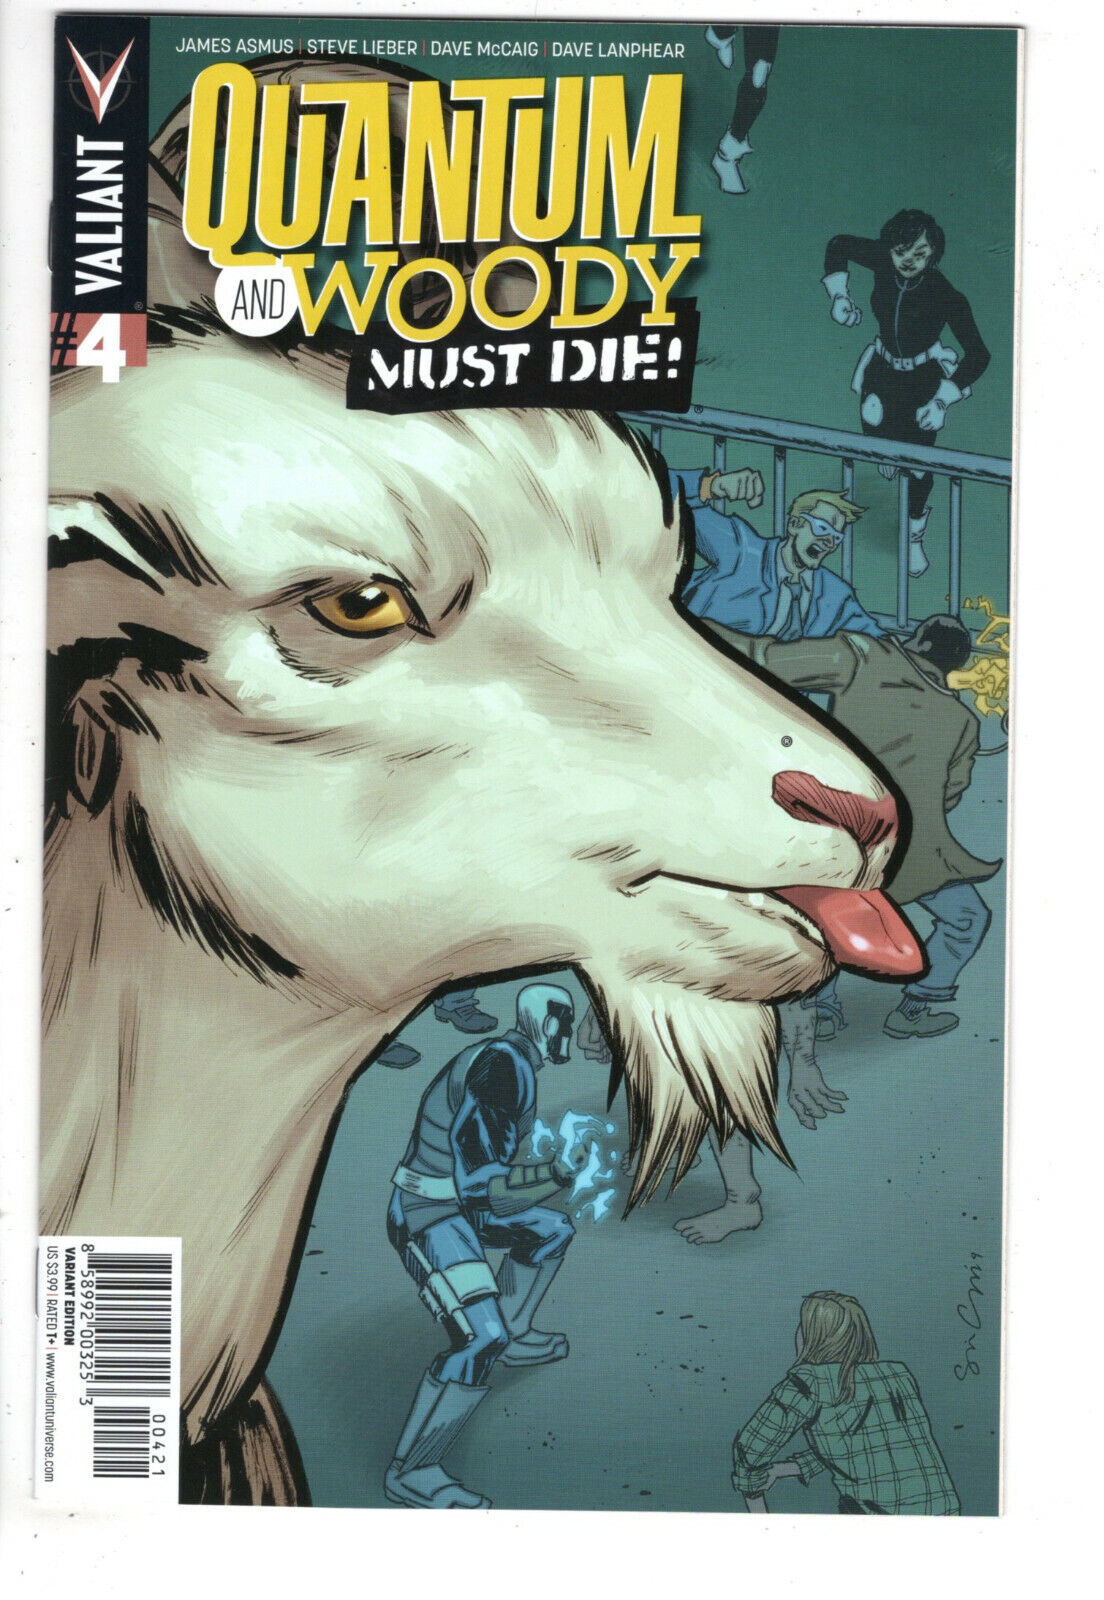 QUANTUM AND WOODY MUST DIE #4 (2015) - GRADE NM - LIMITED 1:20 INCENTIVE VARIANT